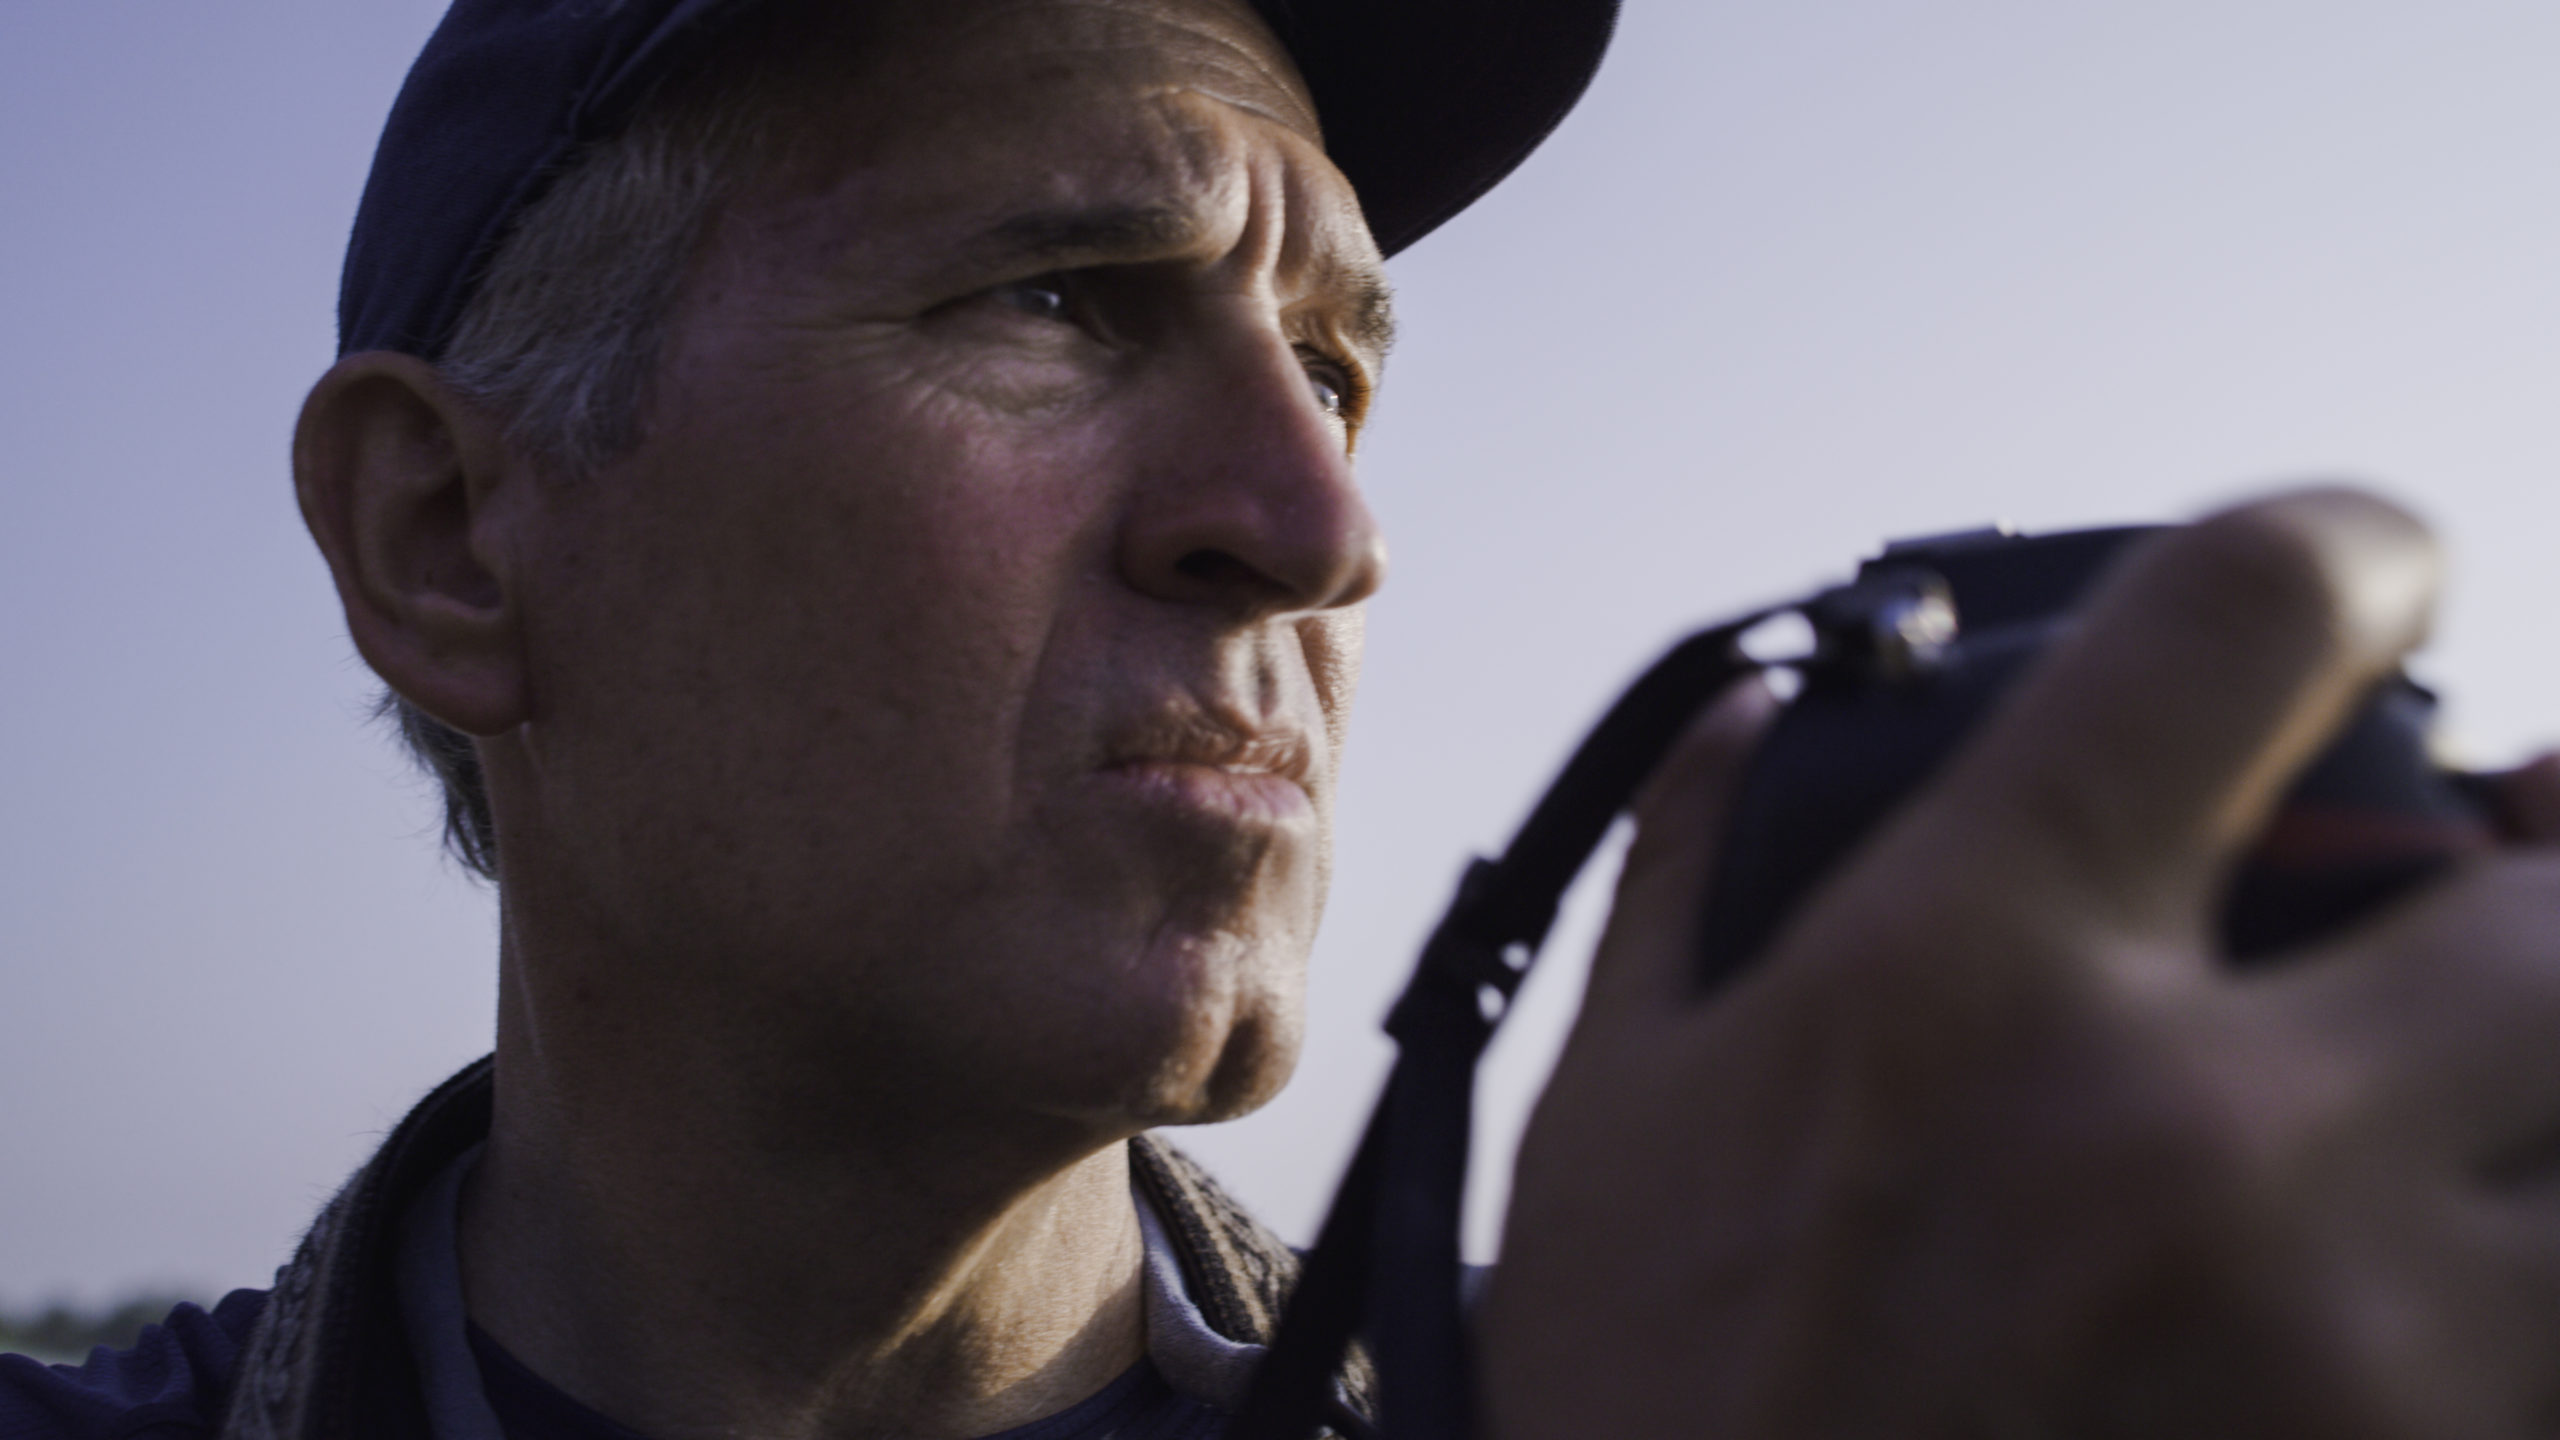 Brian Skerry Talks About Whales Having Rich Cultures In Secrets Of The Whales [Exclusive Interview]